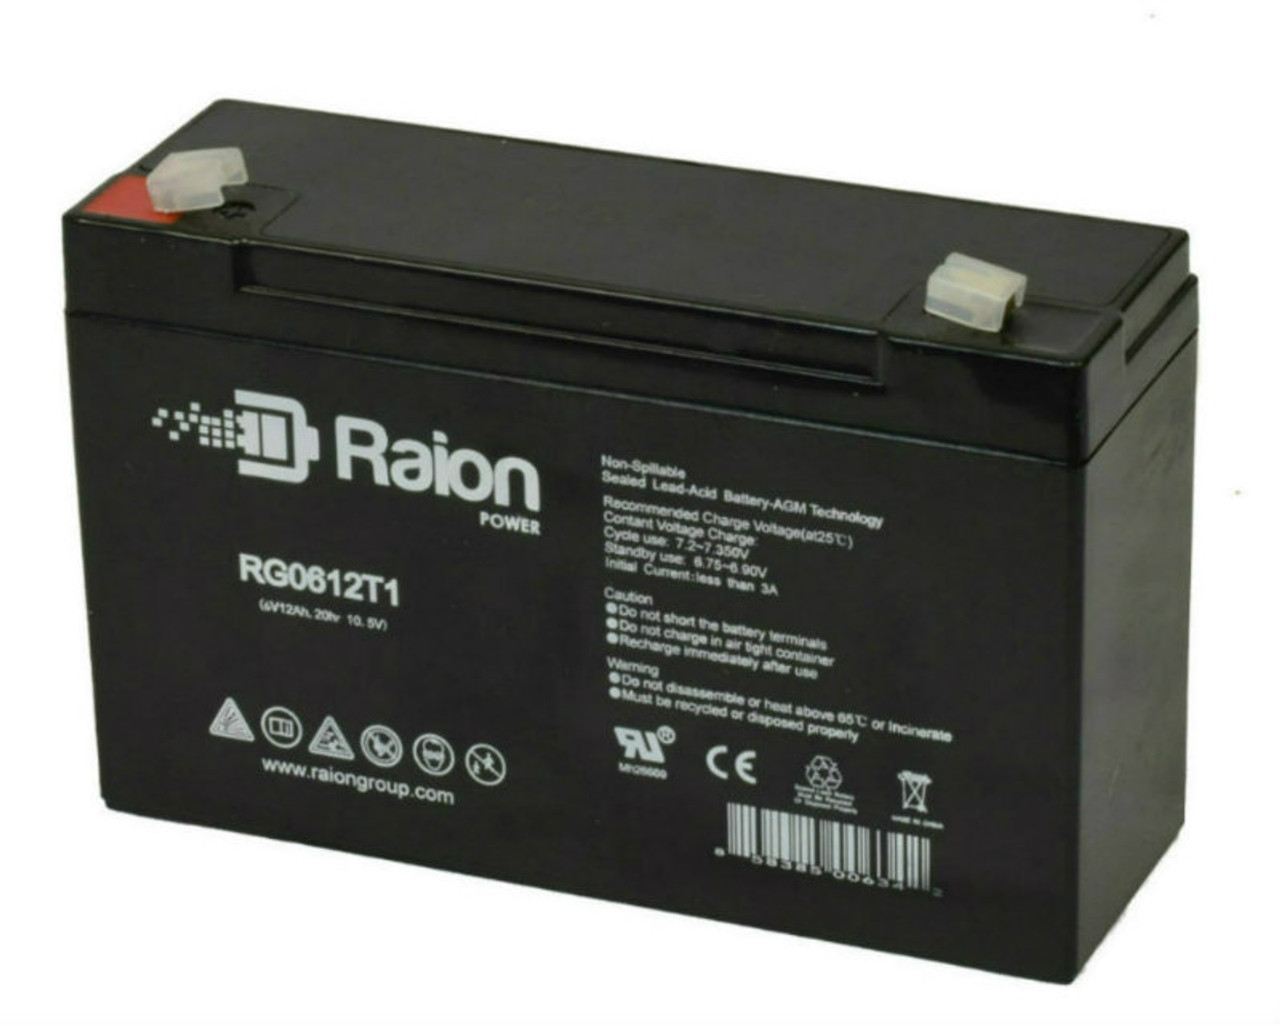 Raion Power RG06120T1 Replacement 6V 12Ah Emergency Light Battery for Expocell P206/120